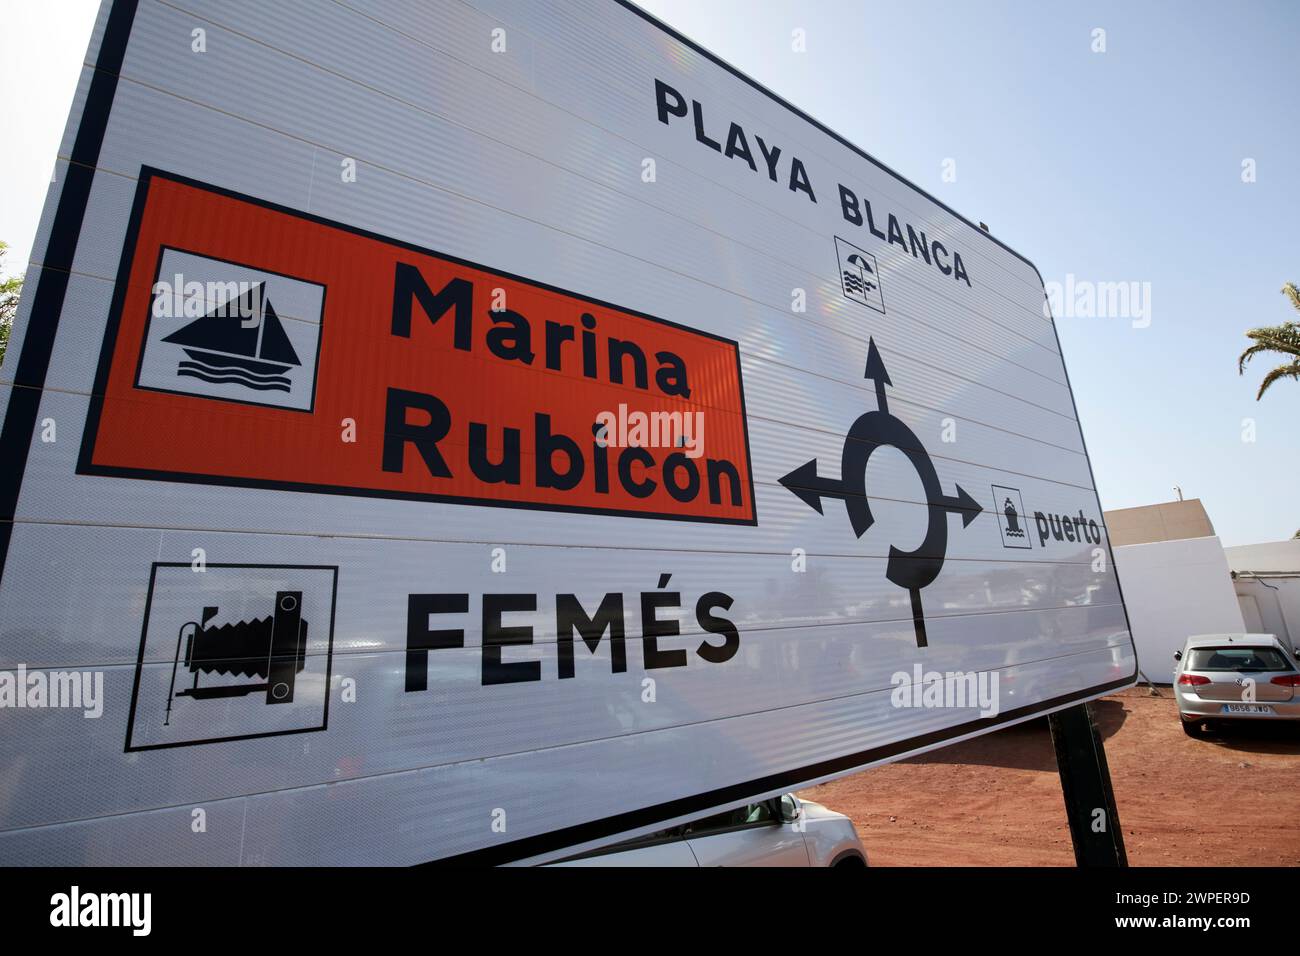 roadsign directions for playa blanca port femes and marina rubicon, Lanzarote, Canary Islands, spain Stock Photo